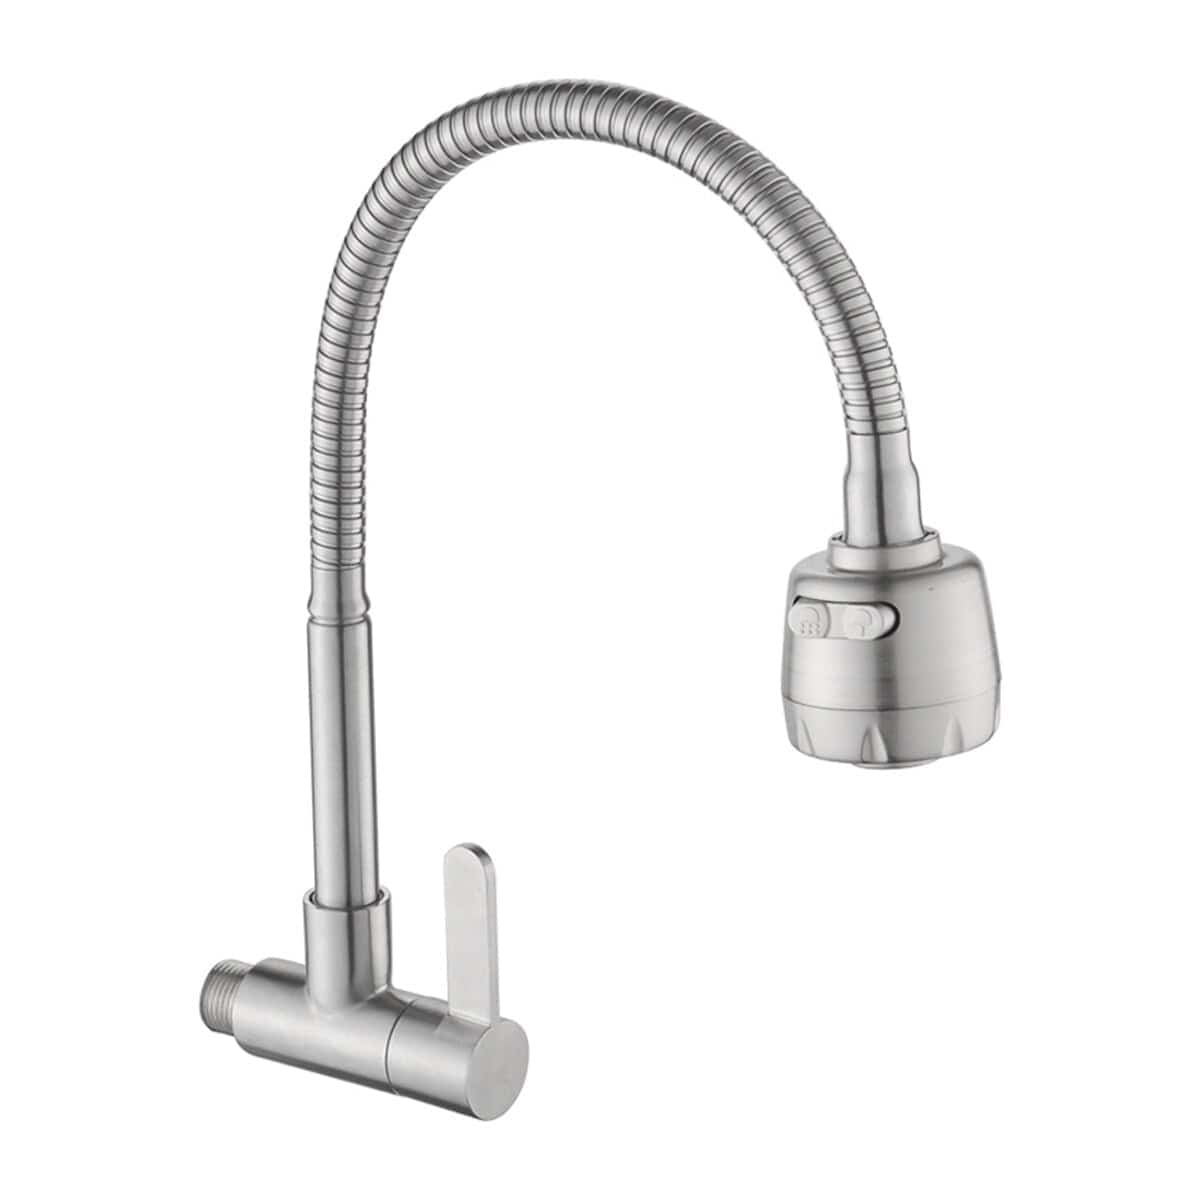 Buy MaxTen Stainless Steel Wall-Mounted Cold Kitchen Sink Faucet Tap - SC31-830C | Shop at Supply Master Accra, Ghana Kitchen Tap Buy Tools hardware Building materials